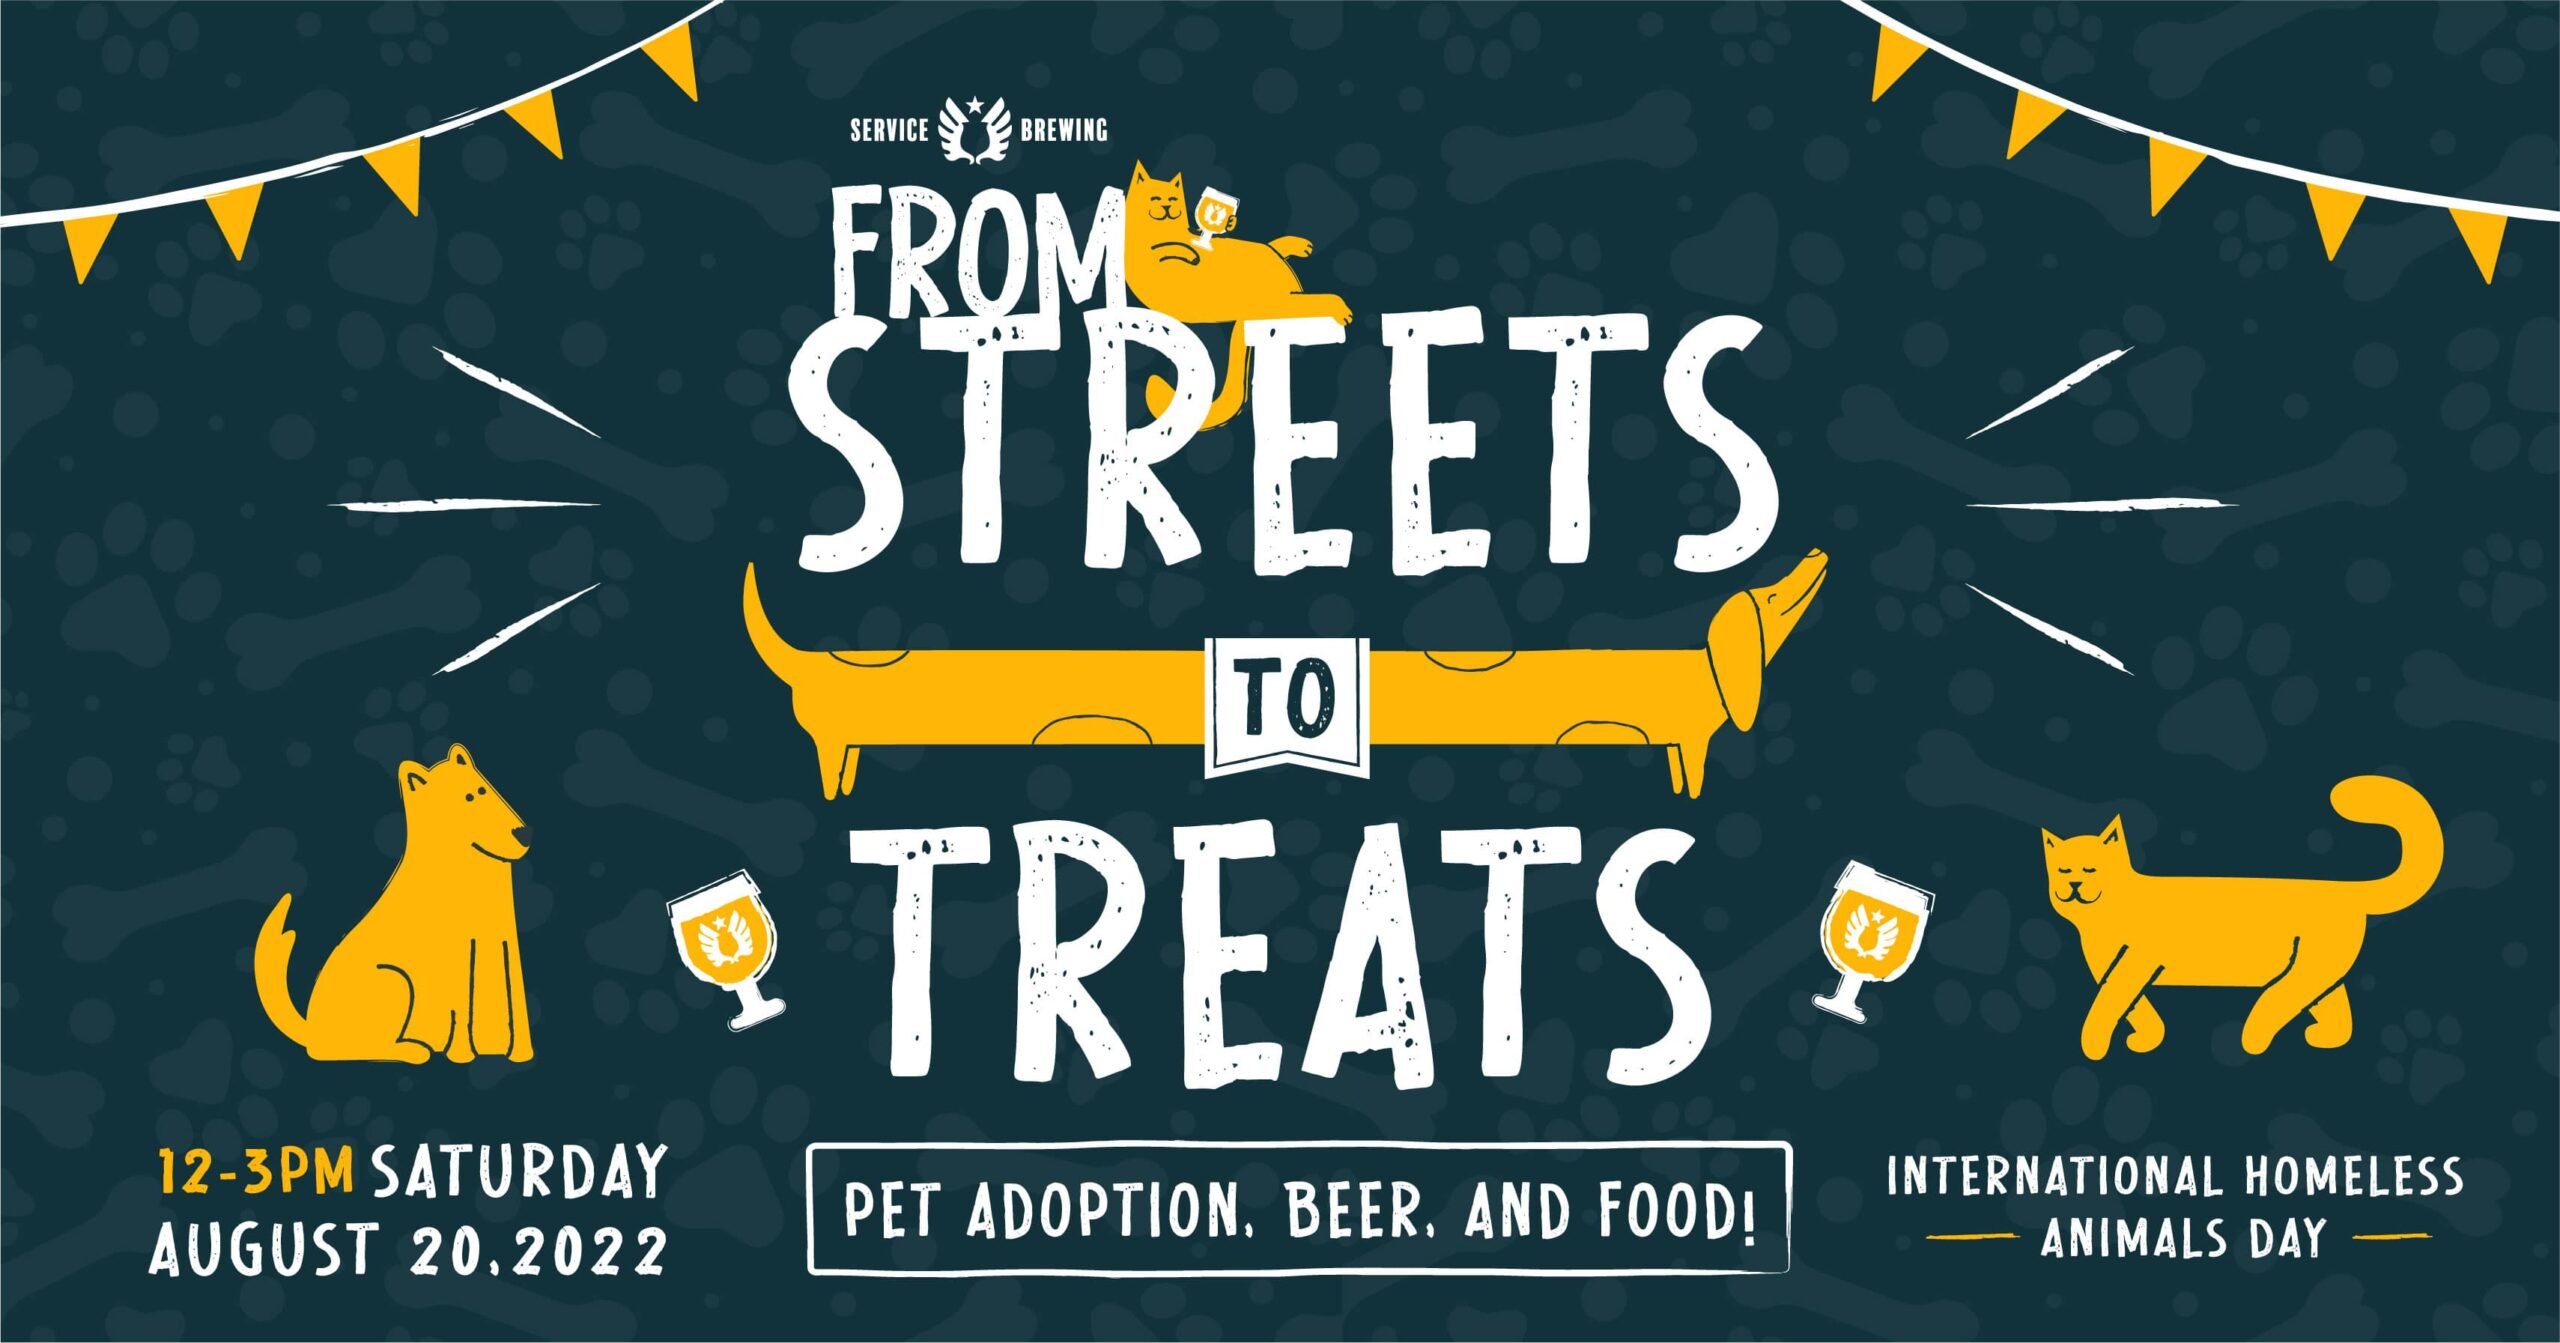 FROM STREETS TO TREATS